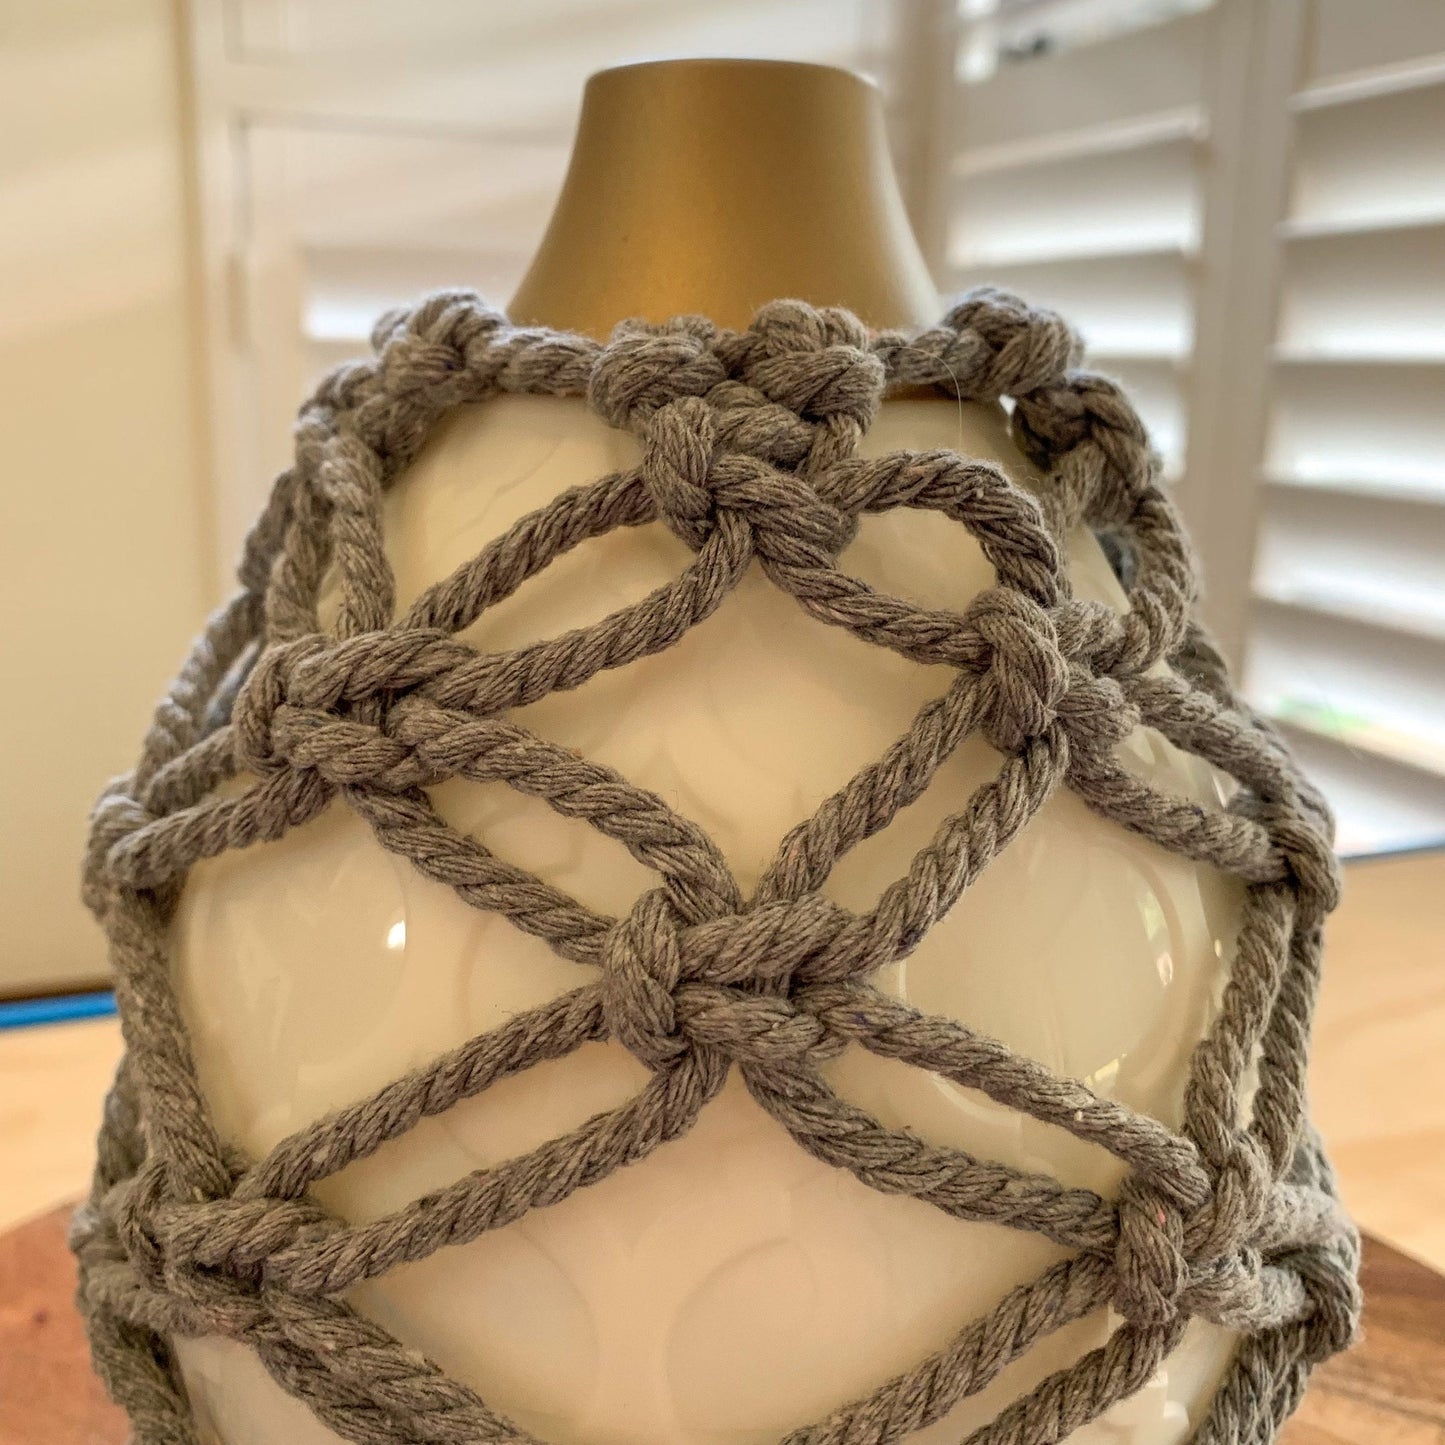 Macrame Diffuser Cosy for Young Living Desert Mist Diffuser